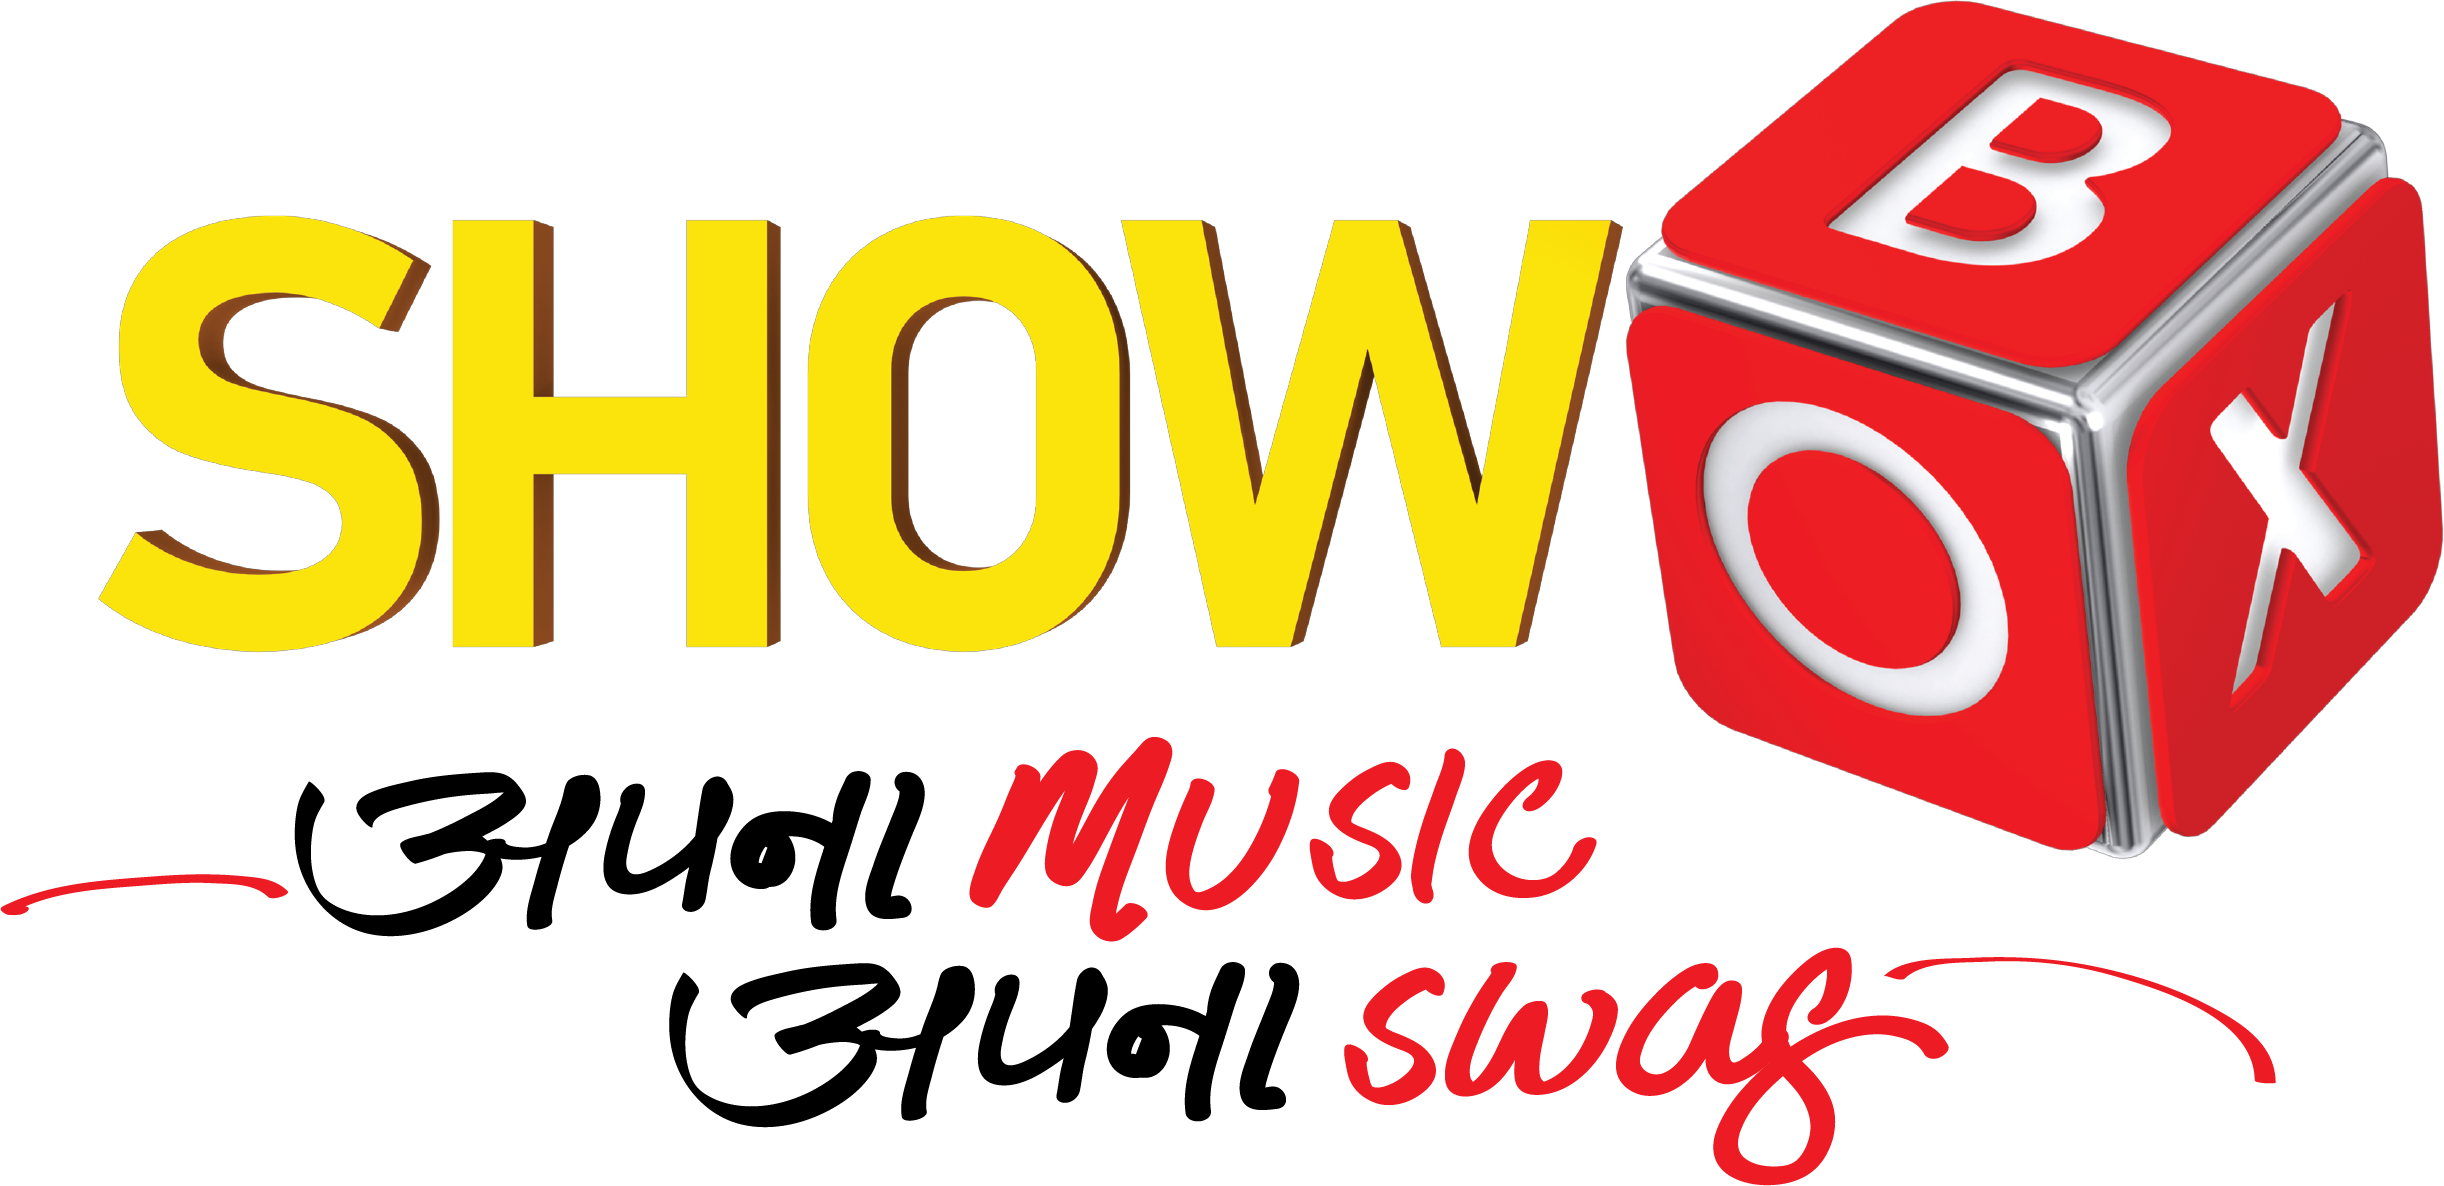 ShowBox – Apna Music, Apna Swag! IN10 Media set to launch youth-centric music channel